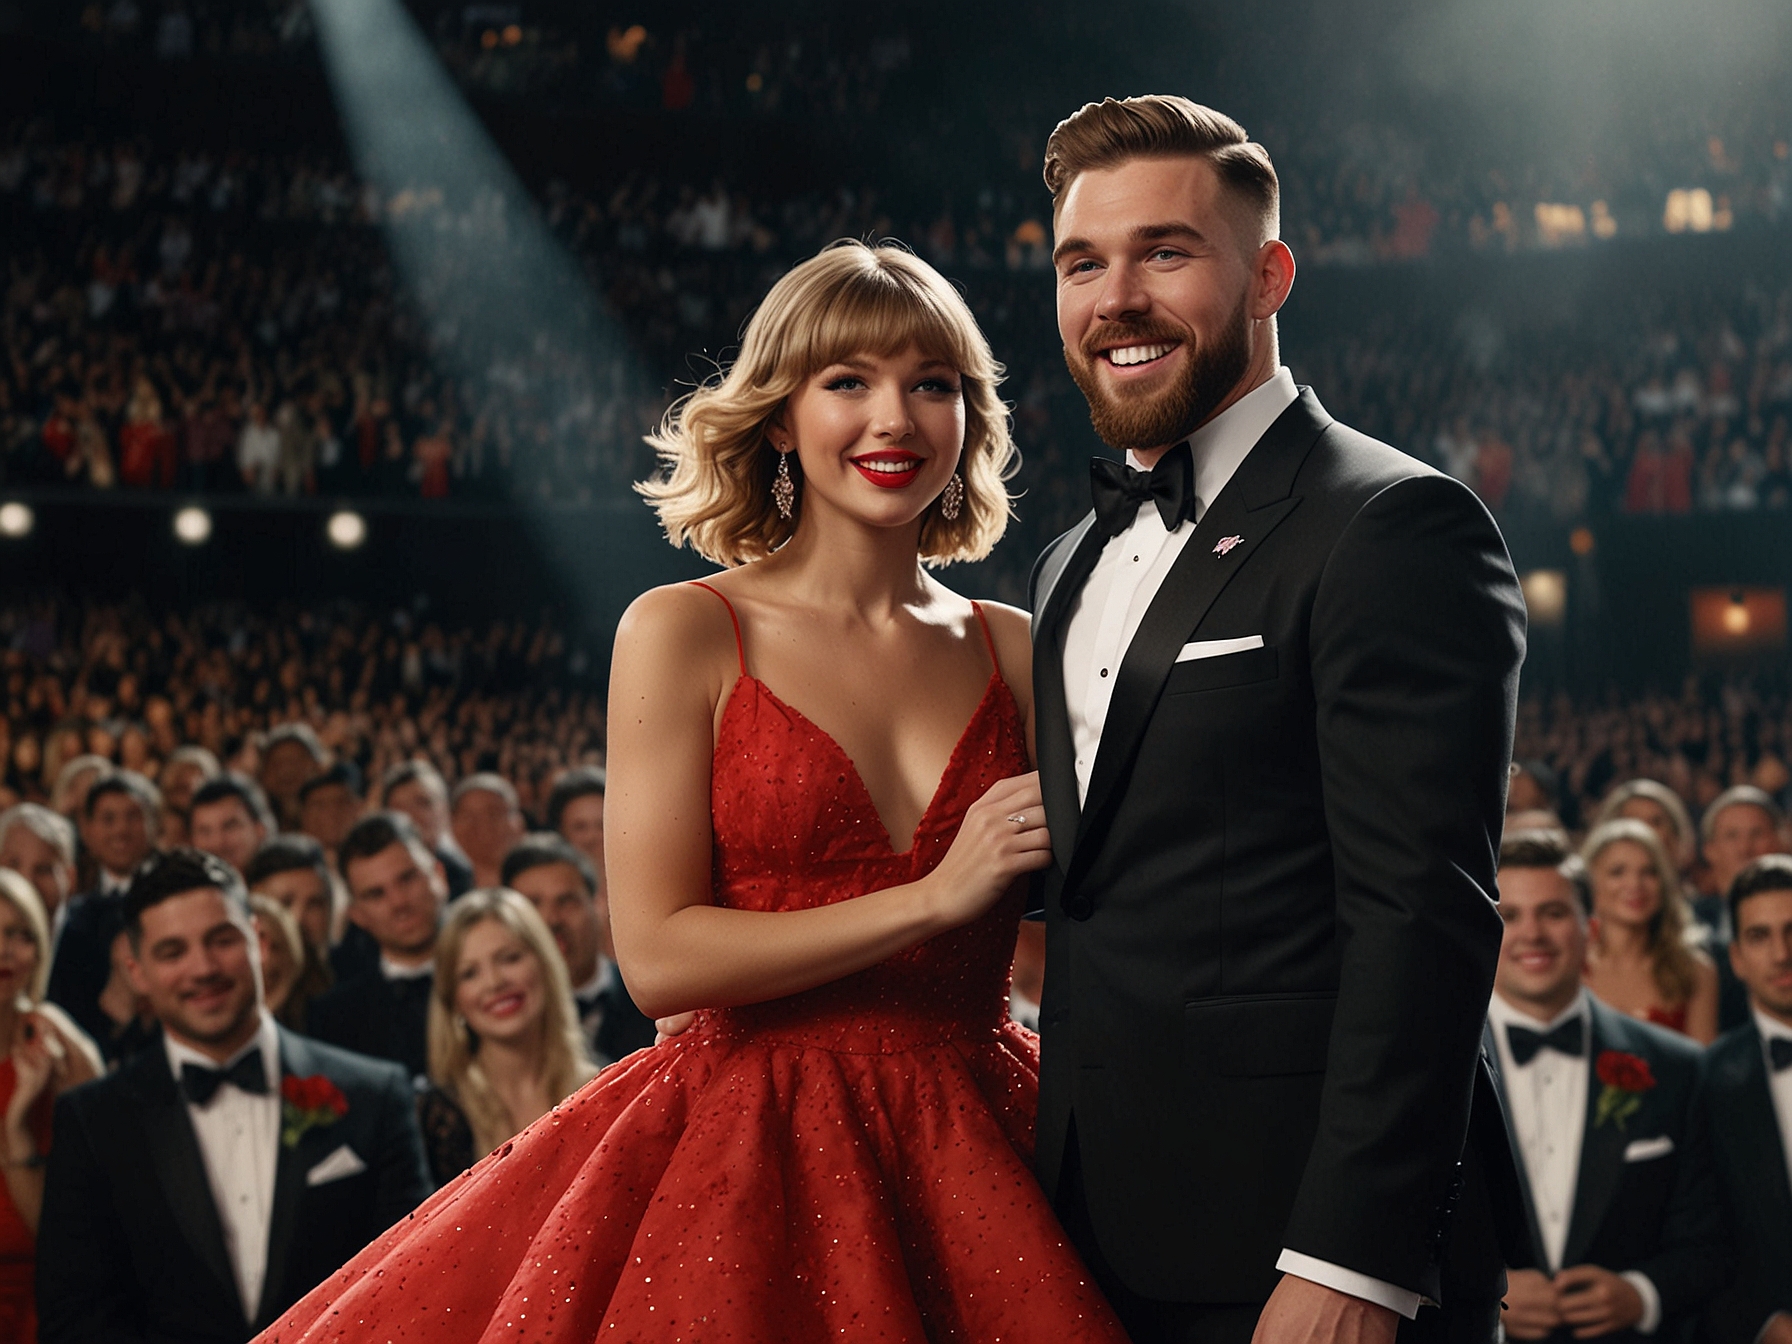 Travis Kelce, dressed in a tuxedo, top hat, and bow tie, joins Taylor Swift on stage. The couple shares a warm smile, emanating chemistry, while the crowd's excitement is palpable around them.